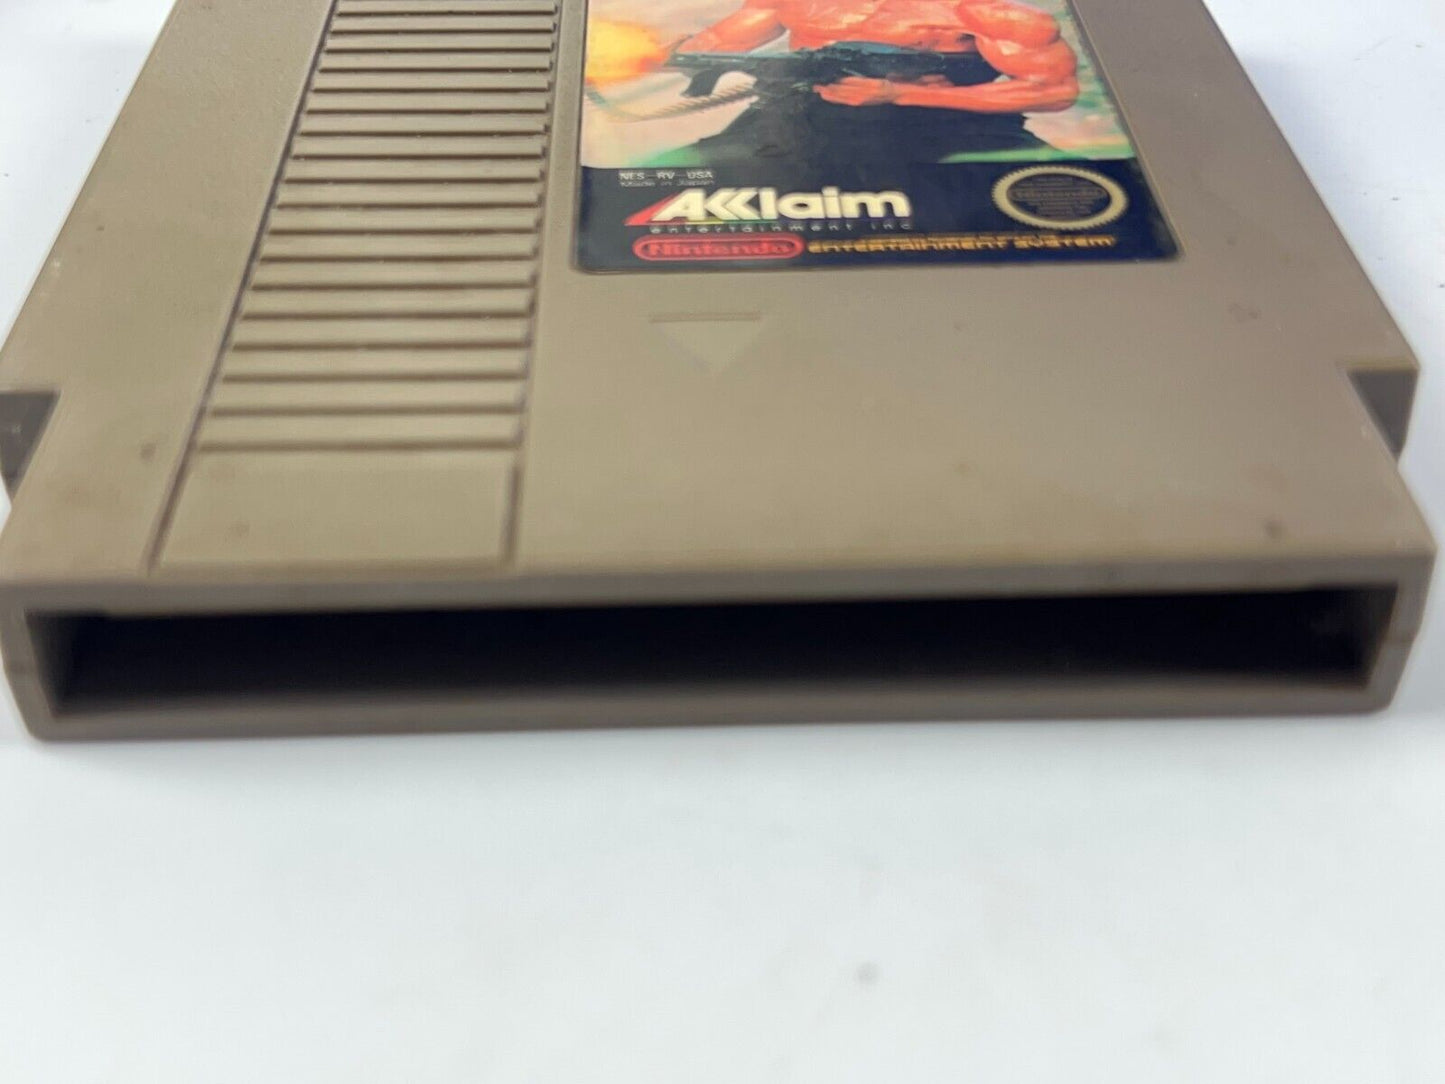 Rambo - Nintendo NES Game Authentic Tested